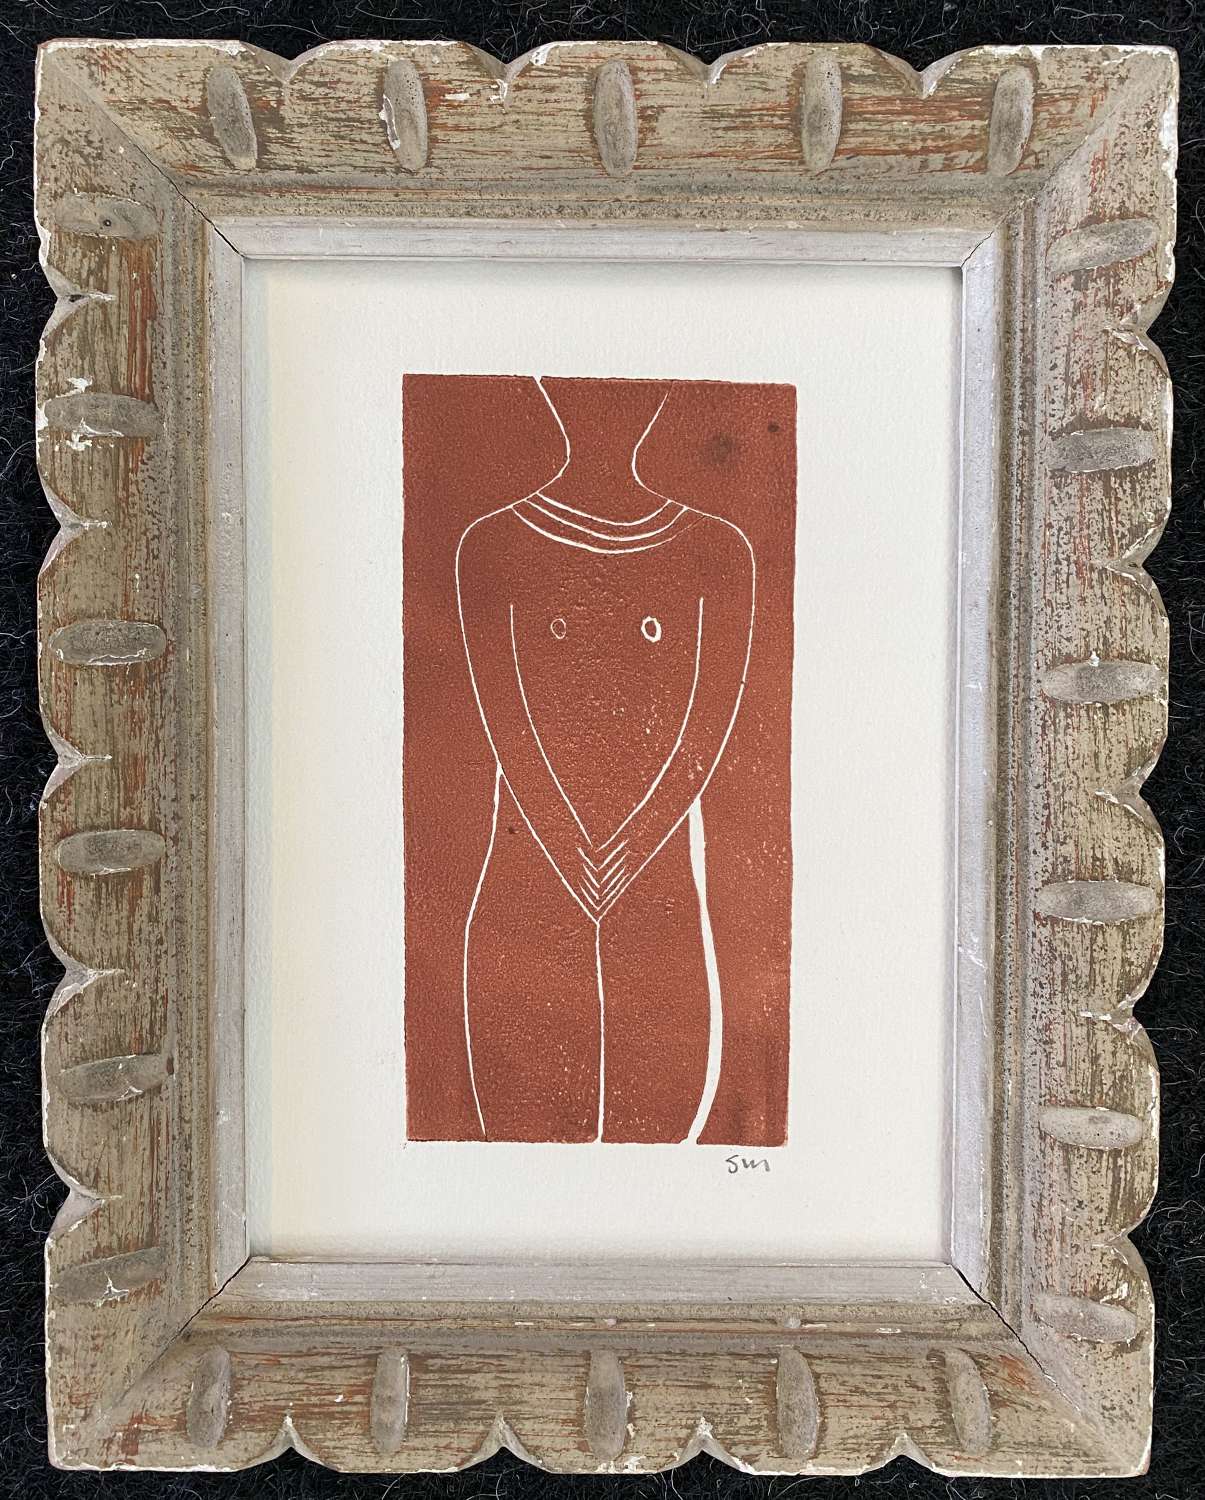 Susan Moxley - Standing Nude